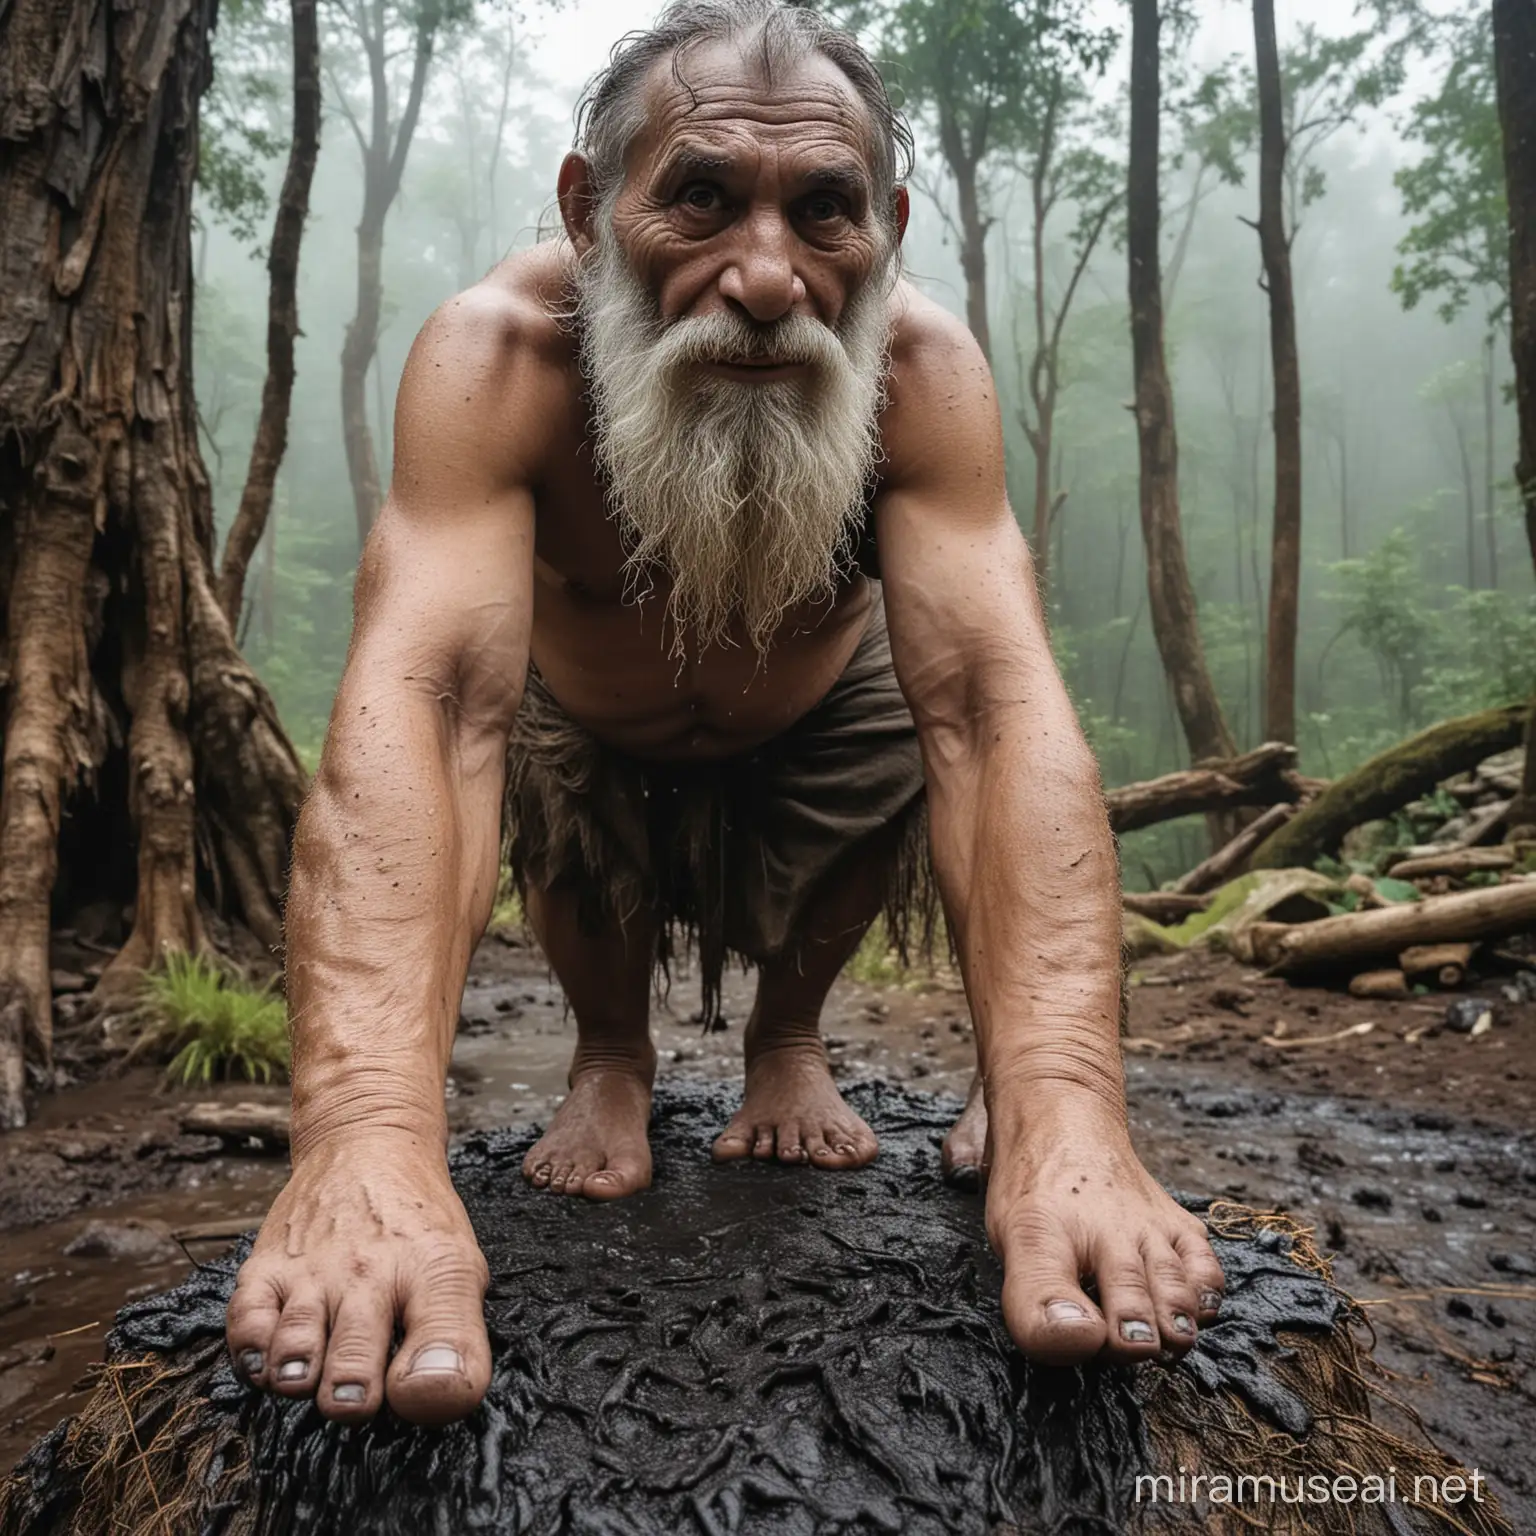 troll,large feet,large hand,loincloth,dumpy,chubby,primitive,hairy,long beard,old age,rainy,wet dirty black mud cover hand and feet,in the mountain,standing on tree trunk